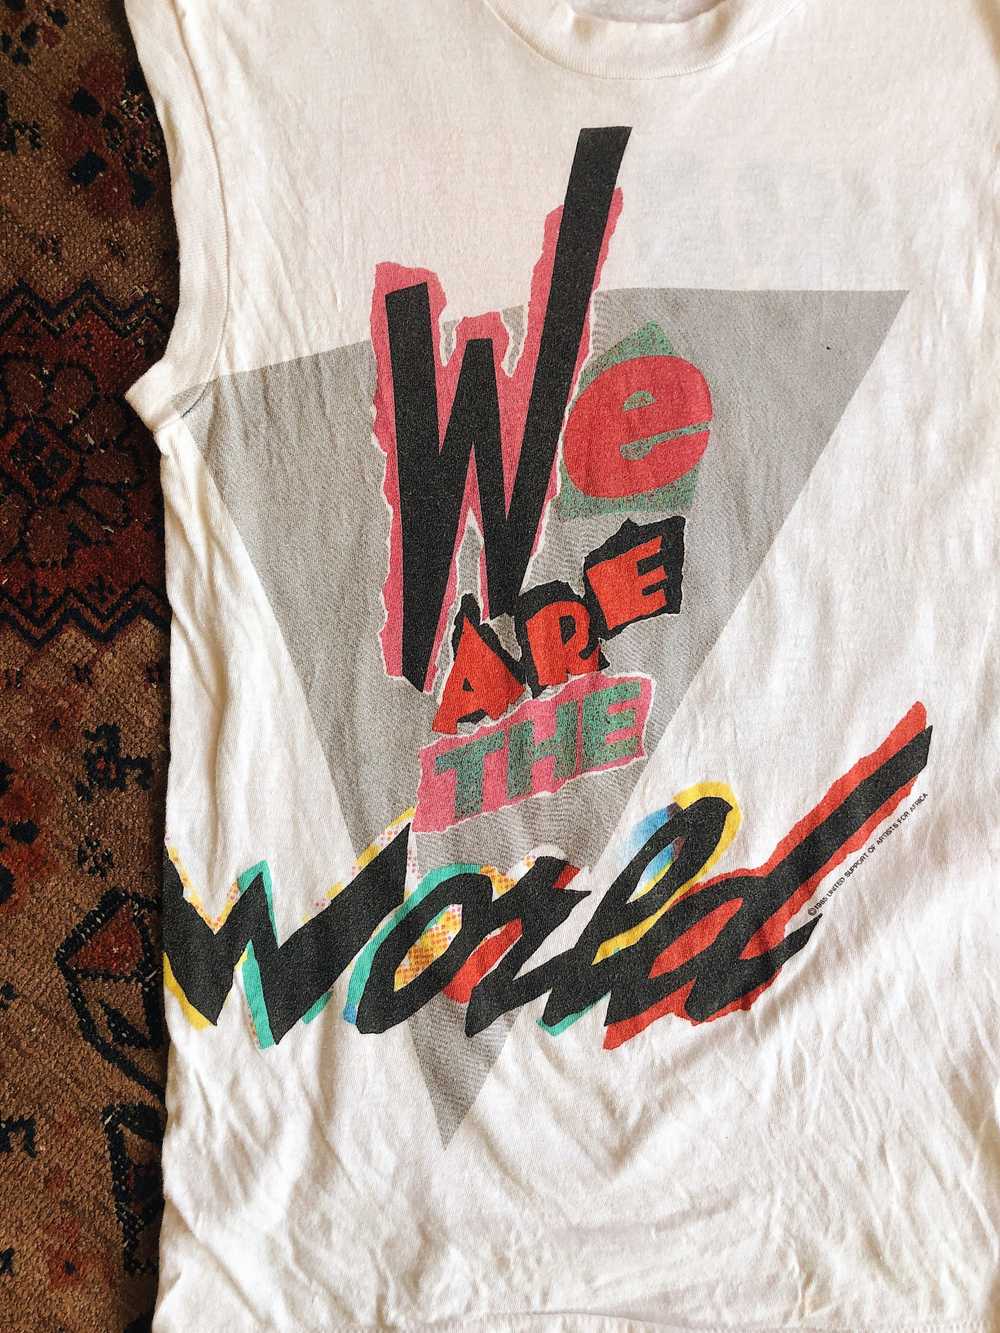 We are the World Tee - image 7